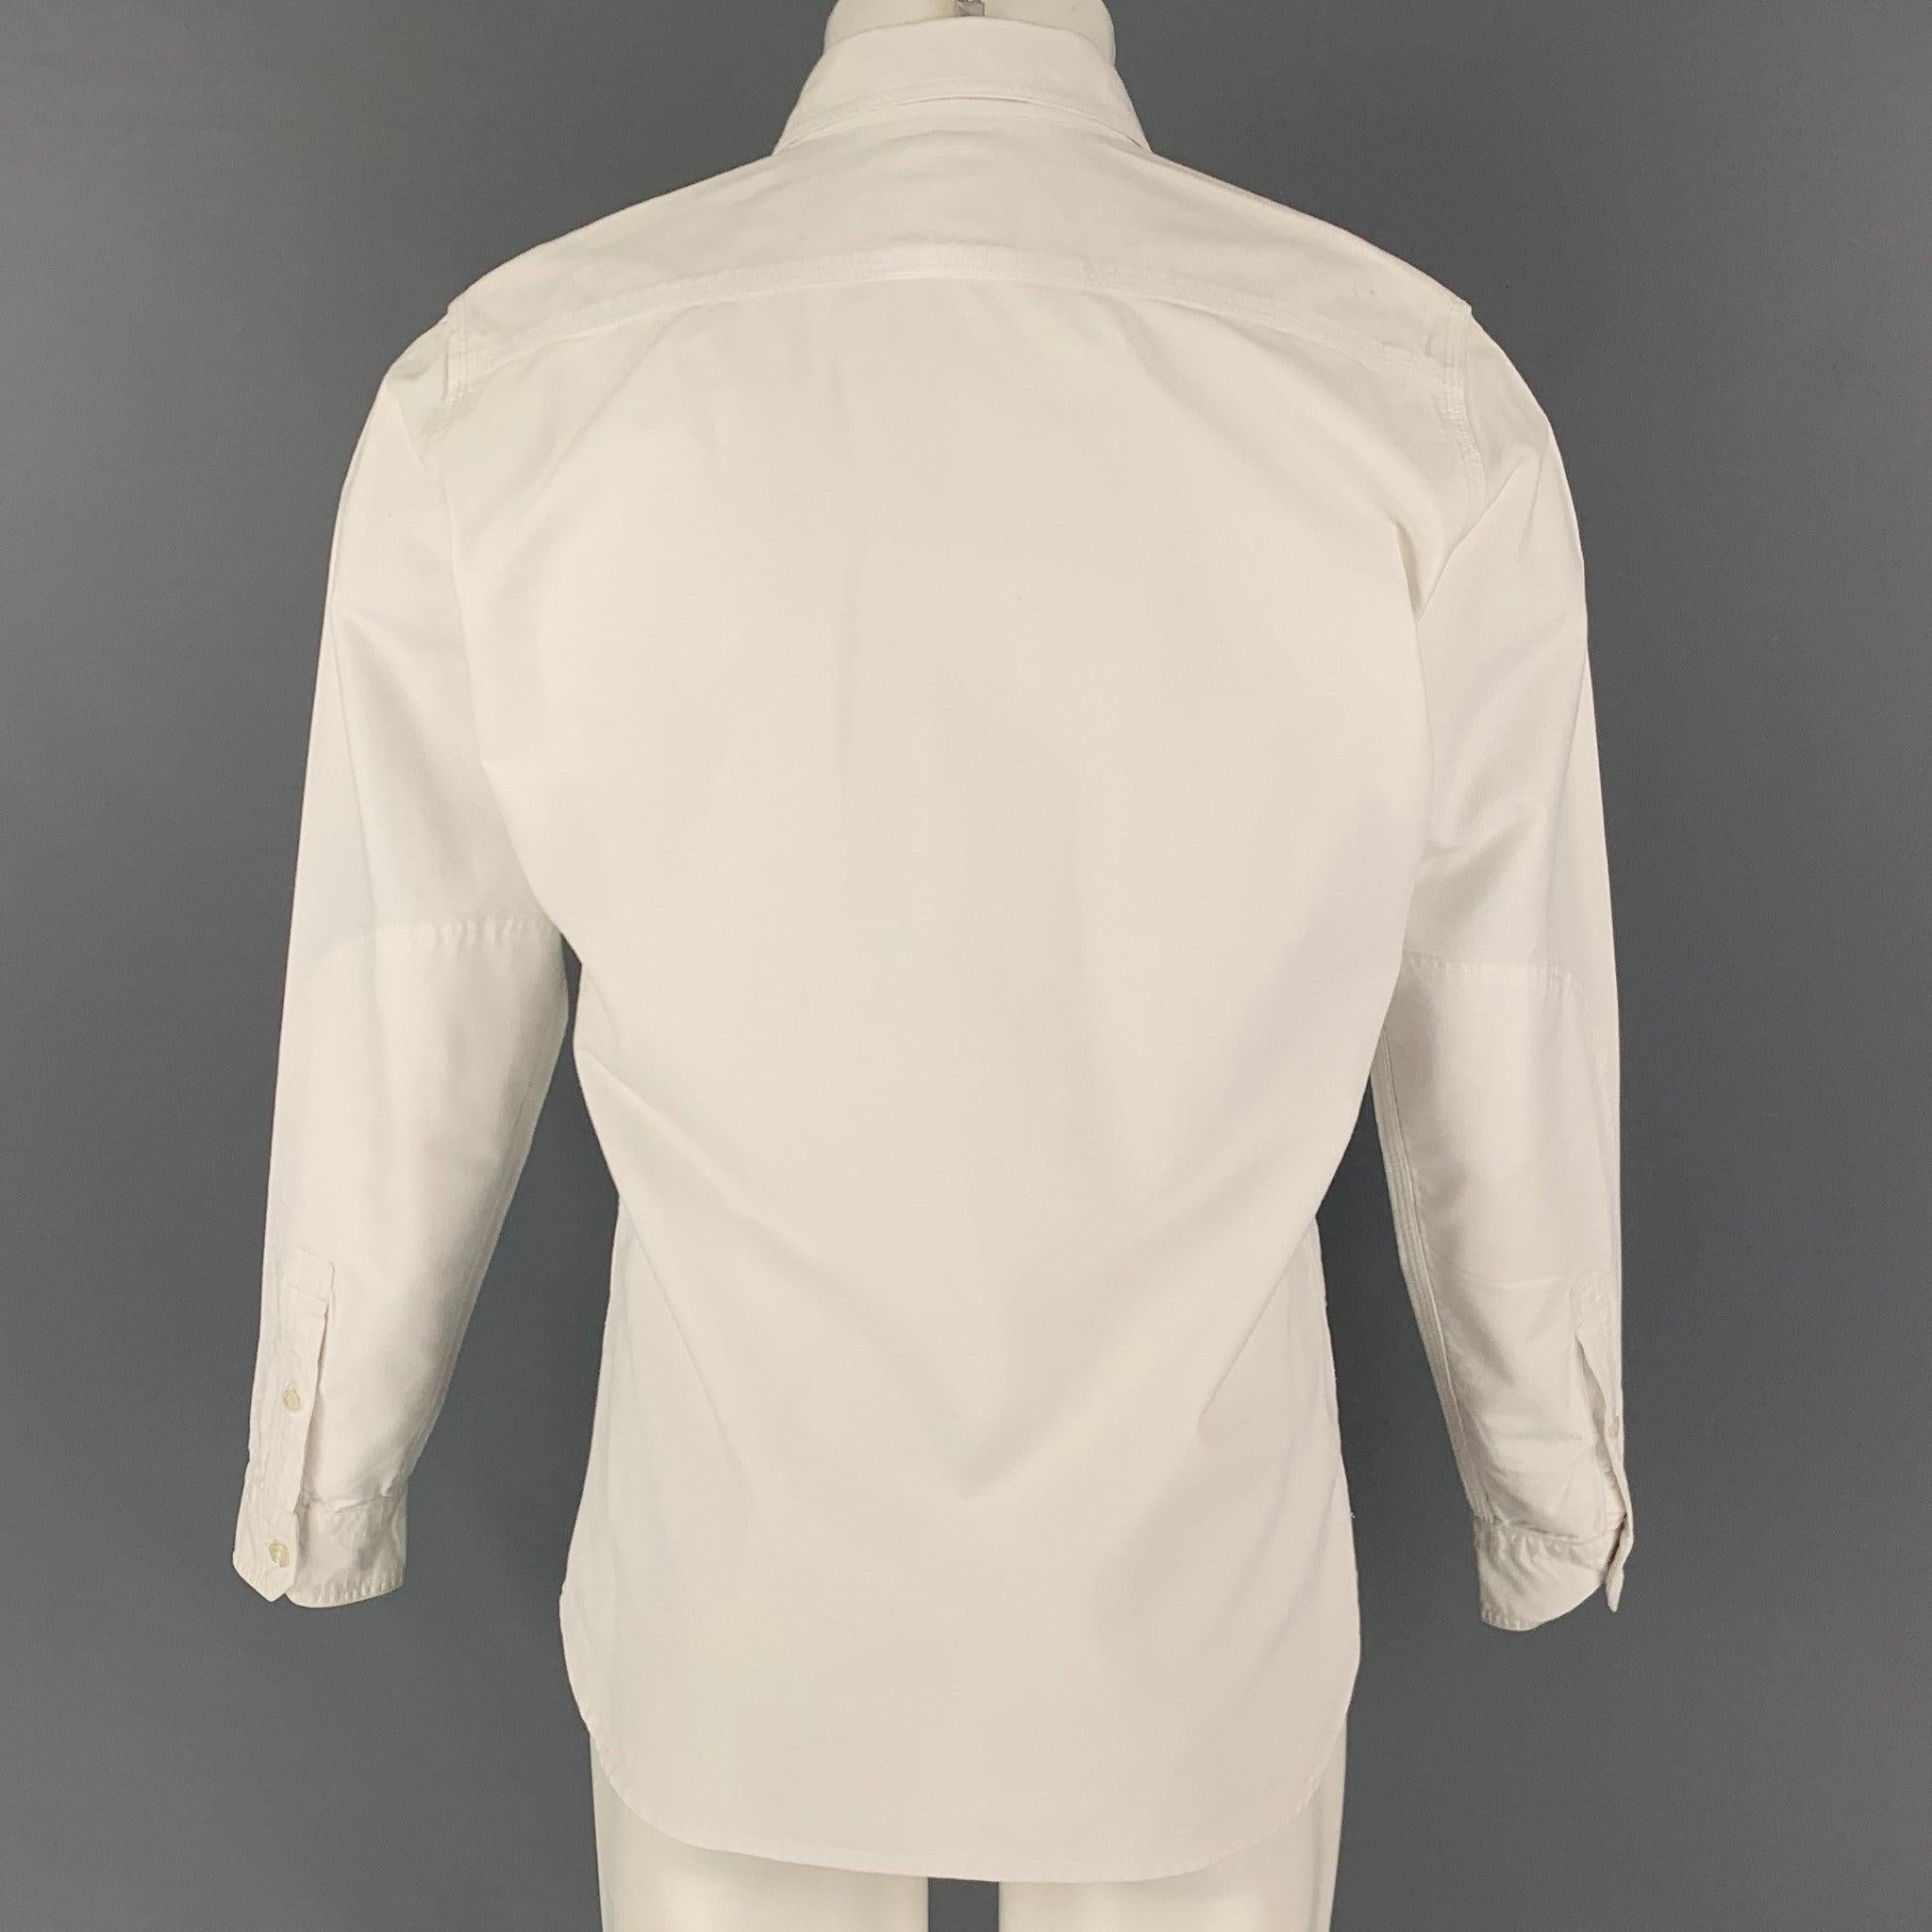 LEVI'S White Cotton Button Up Long Sleeve Shirt In Good Condition For Sale In San Francisco, CA